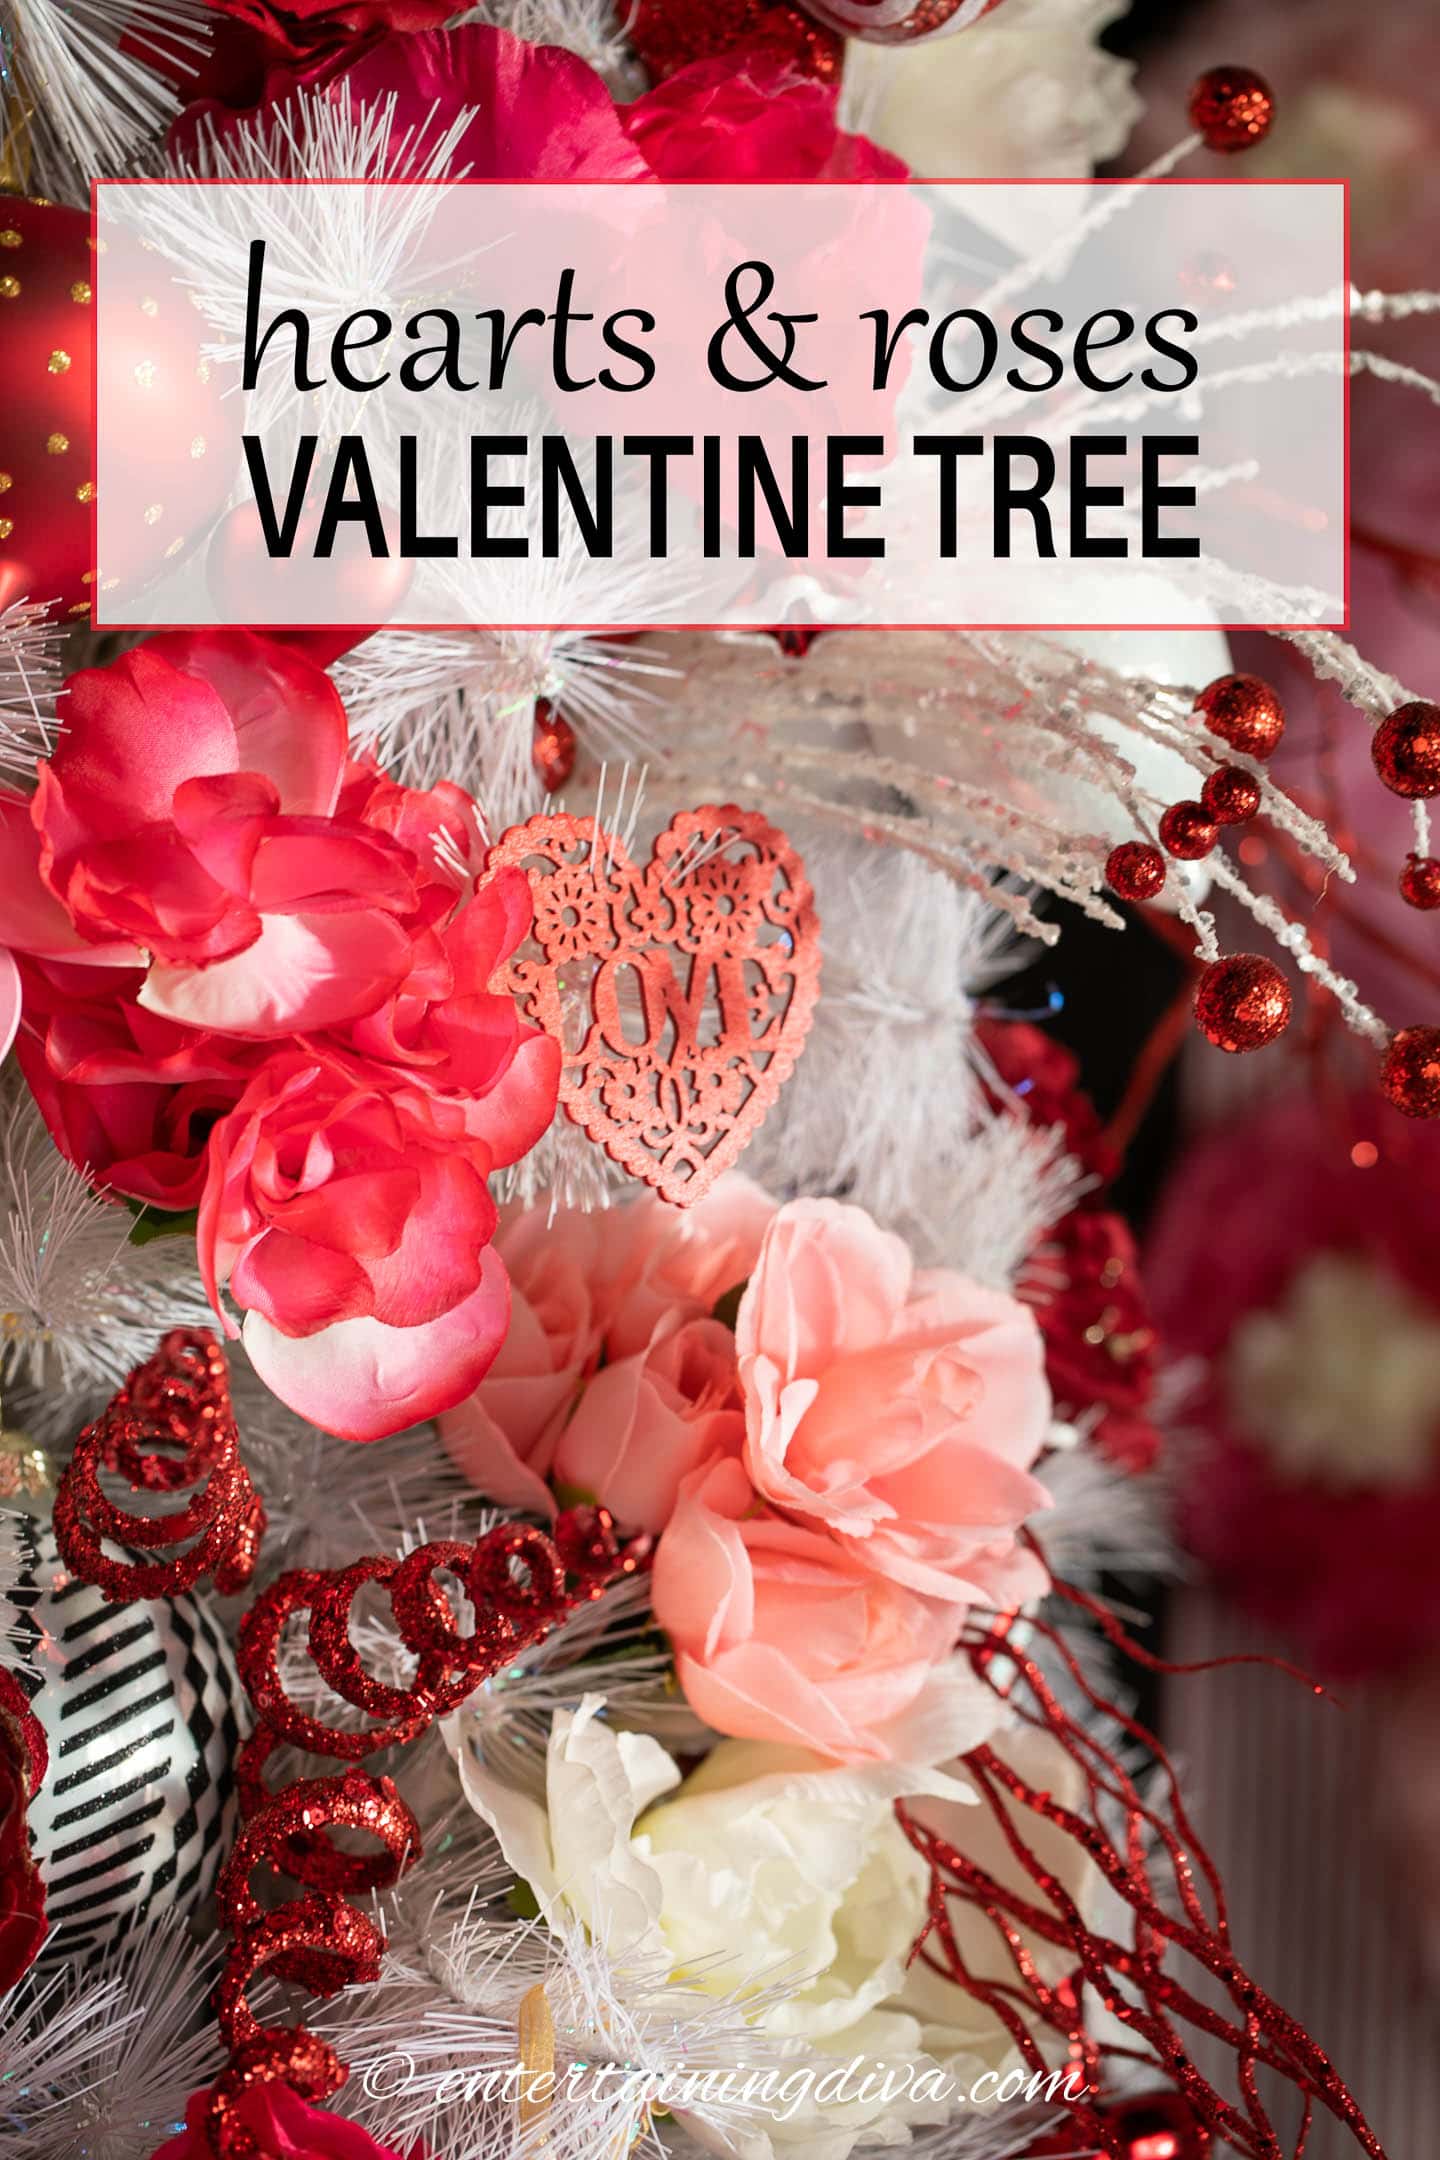 close up of the Valentine's Day tree decoration with the text "hearts & roses Valentine Tree" at the top